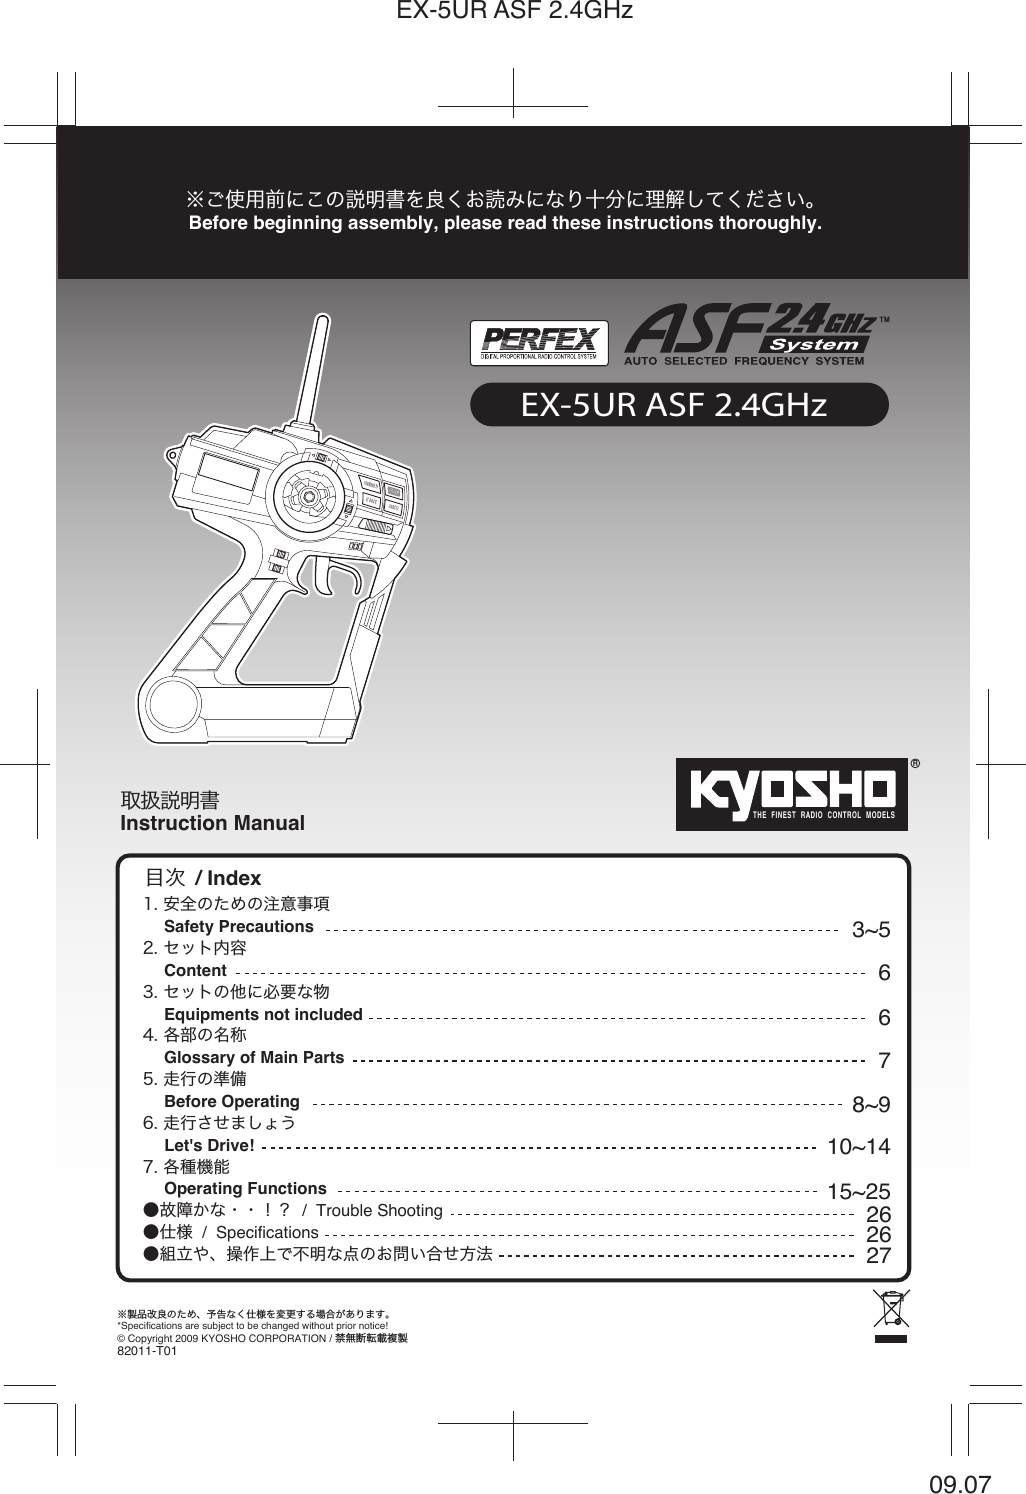 THE  FINEST  RADIO  CONTROL  MODELSRInstruction Manual※製品改良のため、予告なく仕様を変更する場合があります。*Specifications are subject to be changed without prior notice!※ご使用前にこの説明書を良くお読みになり十分に理解してください。Before beginning assembly, please read these instructions thoroughly.© Copyright 2009 KYOSHO CORPORATION / 禁無断転載複製82011-T01取扱説明書1. 安全のための注意事項     Safety Precautions2. セット内容     Content  3. セットの他に必要な物     Equipments not included 4. 各部の名称     Glossary of Main Parts  5. 走行の準備     Before Operating6. 走行させましょう     Let&apos;s Drive! 7. 各種機能     Operating Functions●故障かな・・！？  /  Trouble Shooting ●仕様  /  Specifications ●組立や、操作上で不明な点のお問い合せ方法/ Index目次3~56678~910~1415~25262627EX-5UR ASF 2.4GHz09.07EX-5UR ASF 2.4GHz